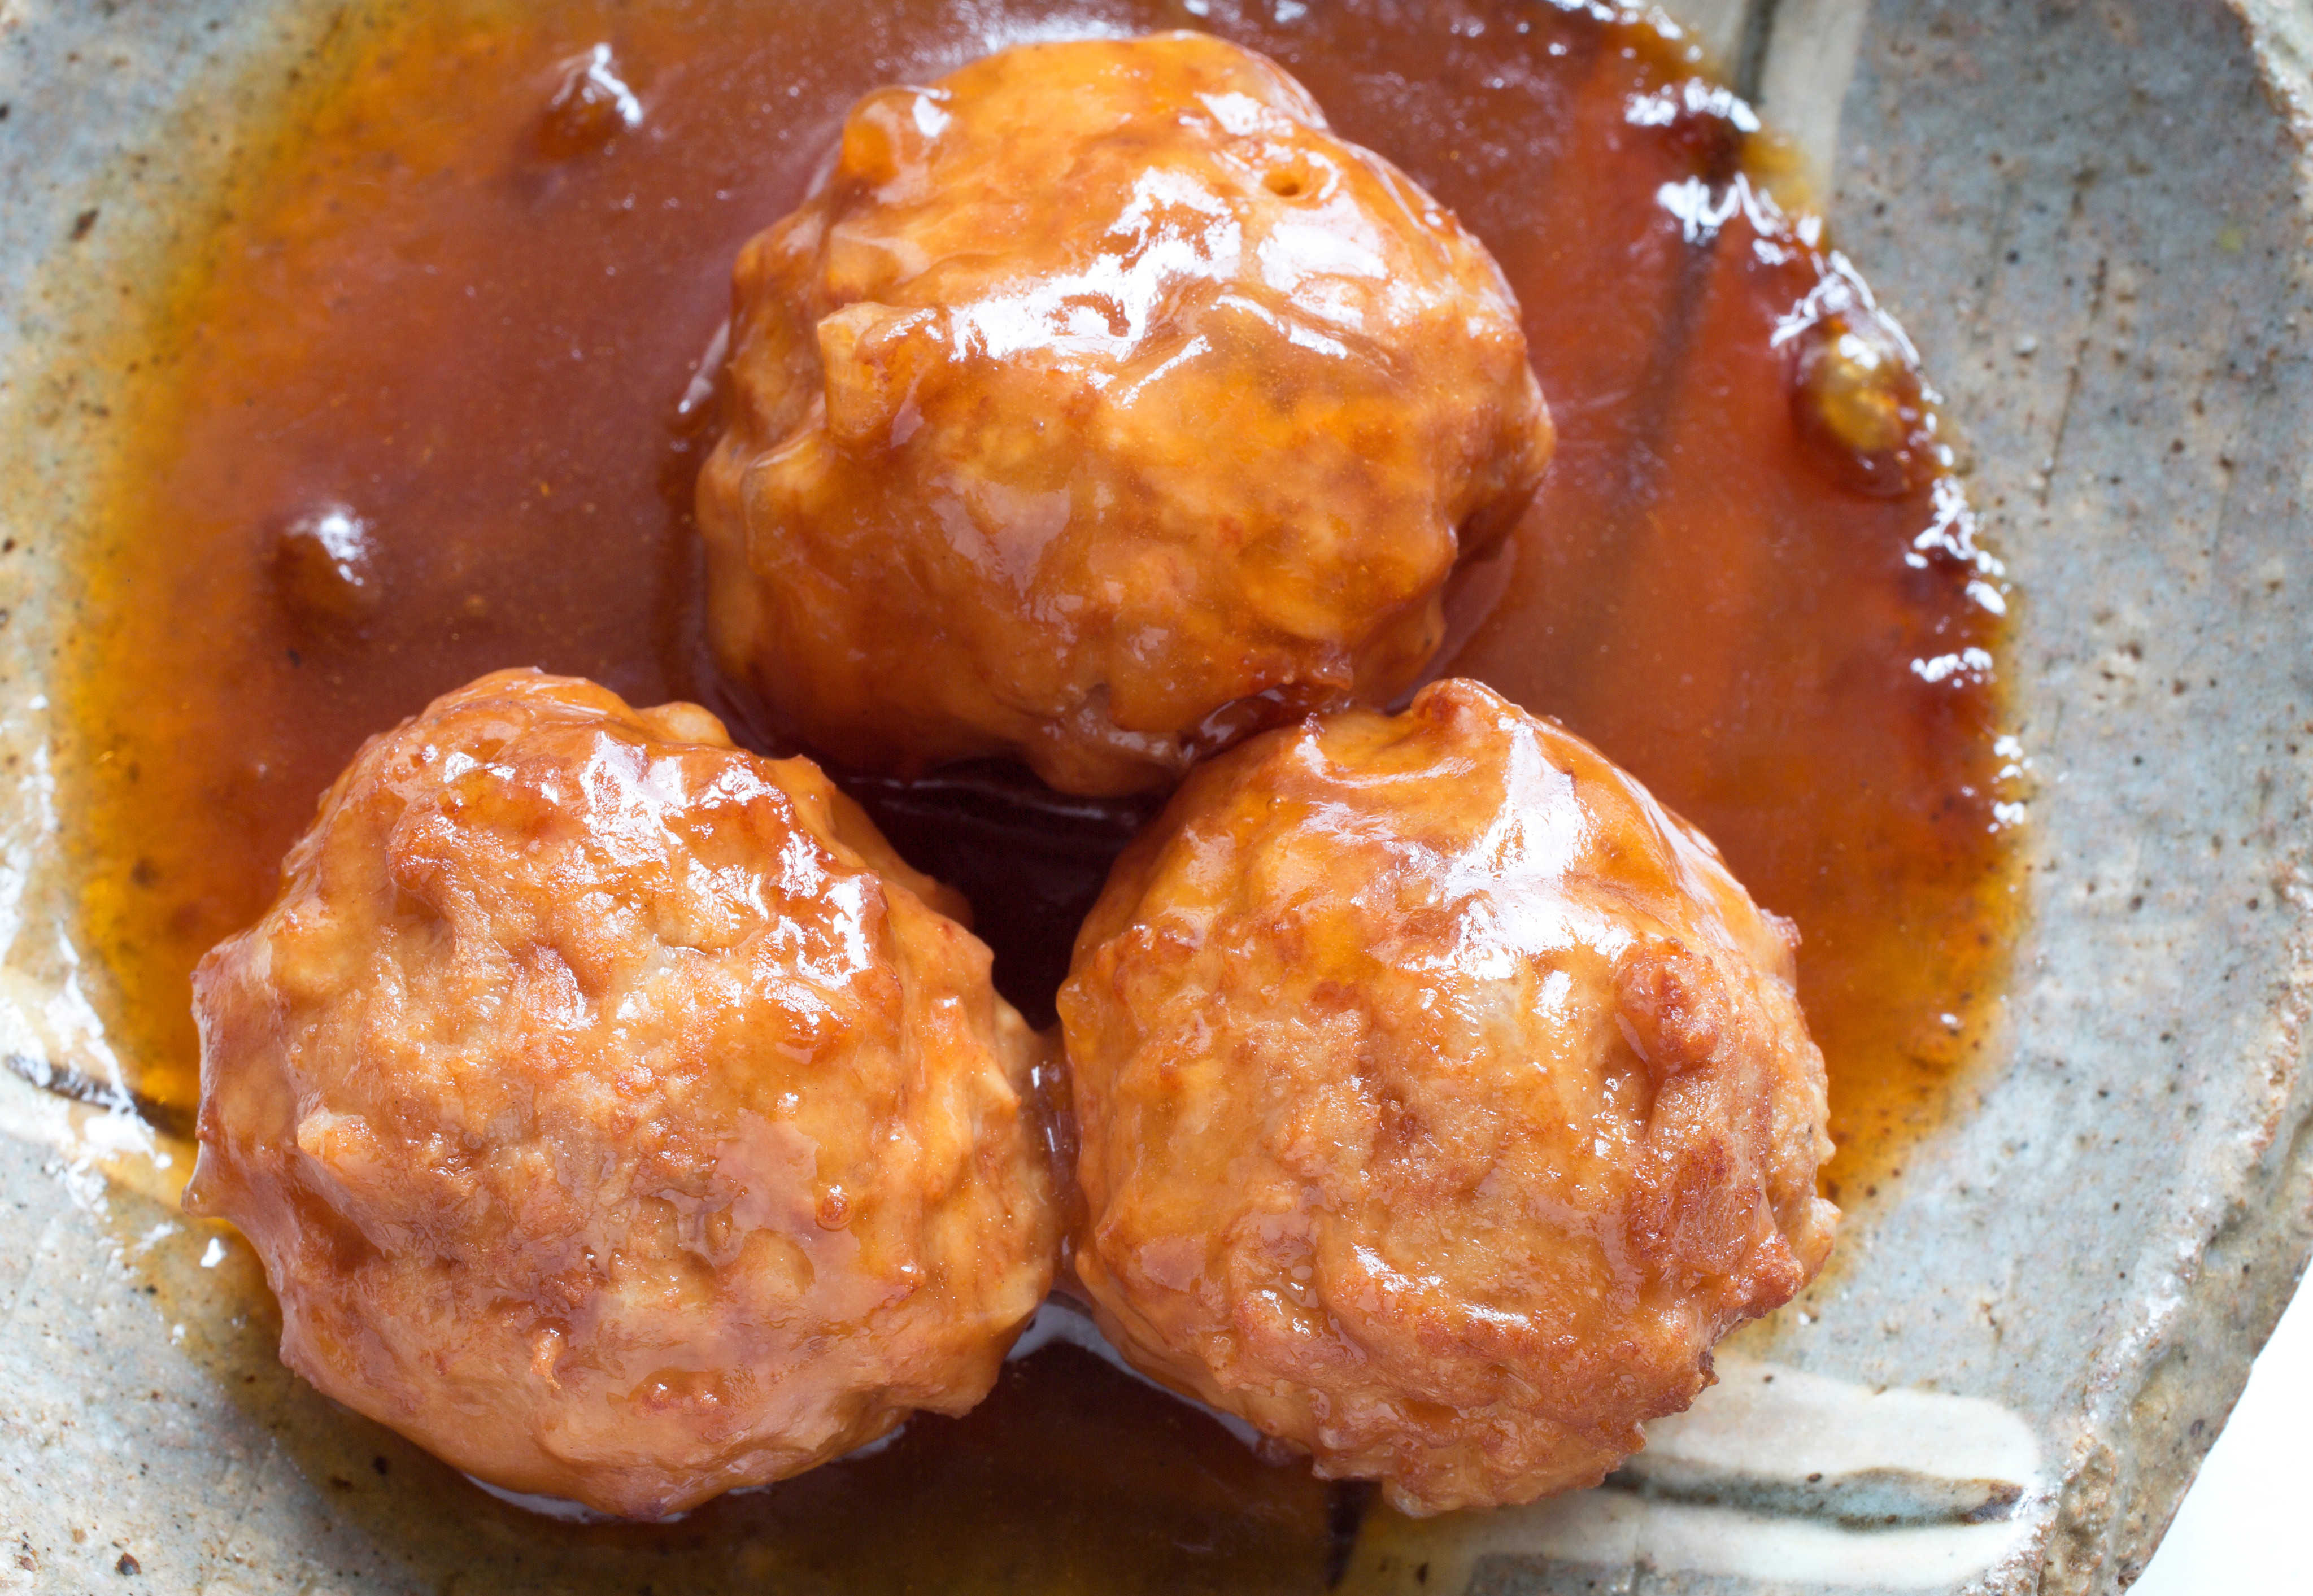 At Chinese restaurants in the UK, sweet and sour pork balls still tend to come served in a bright orange sauce. Photo: Getty Images